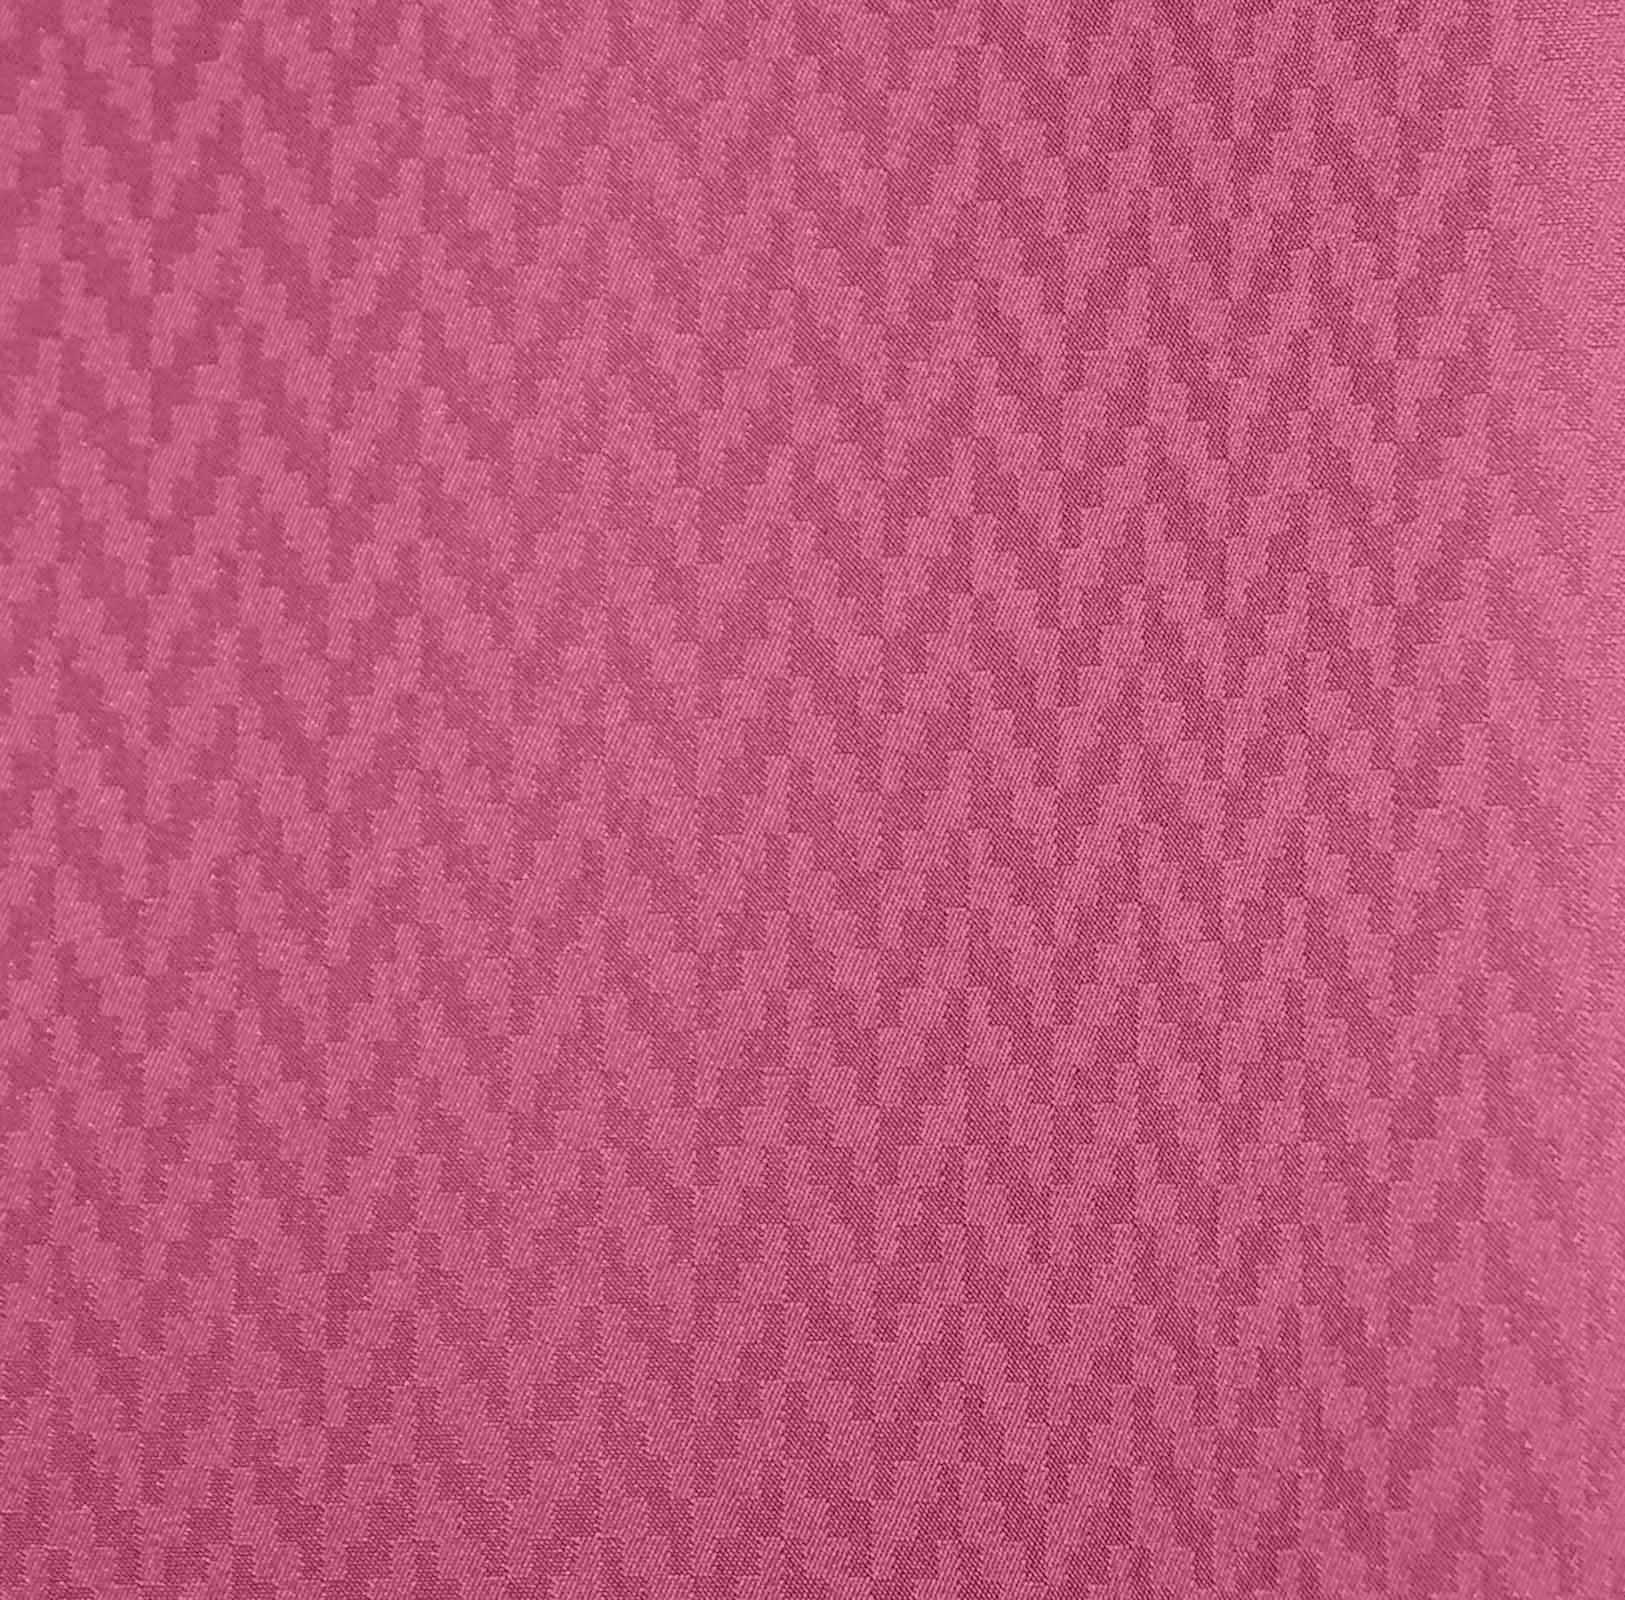 Hospital Partition Curtains, Clinic Curtains Size 8 FT W x 7 ft H, Channel Curtains with Net Fabric, 100% polyester 16 Rustfree Metal Eyelets  16 Plastic Hook, Pink Zig Zag, (8x7 FT, Pk of 1)